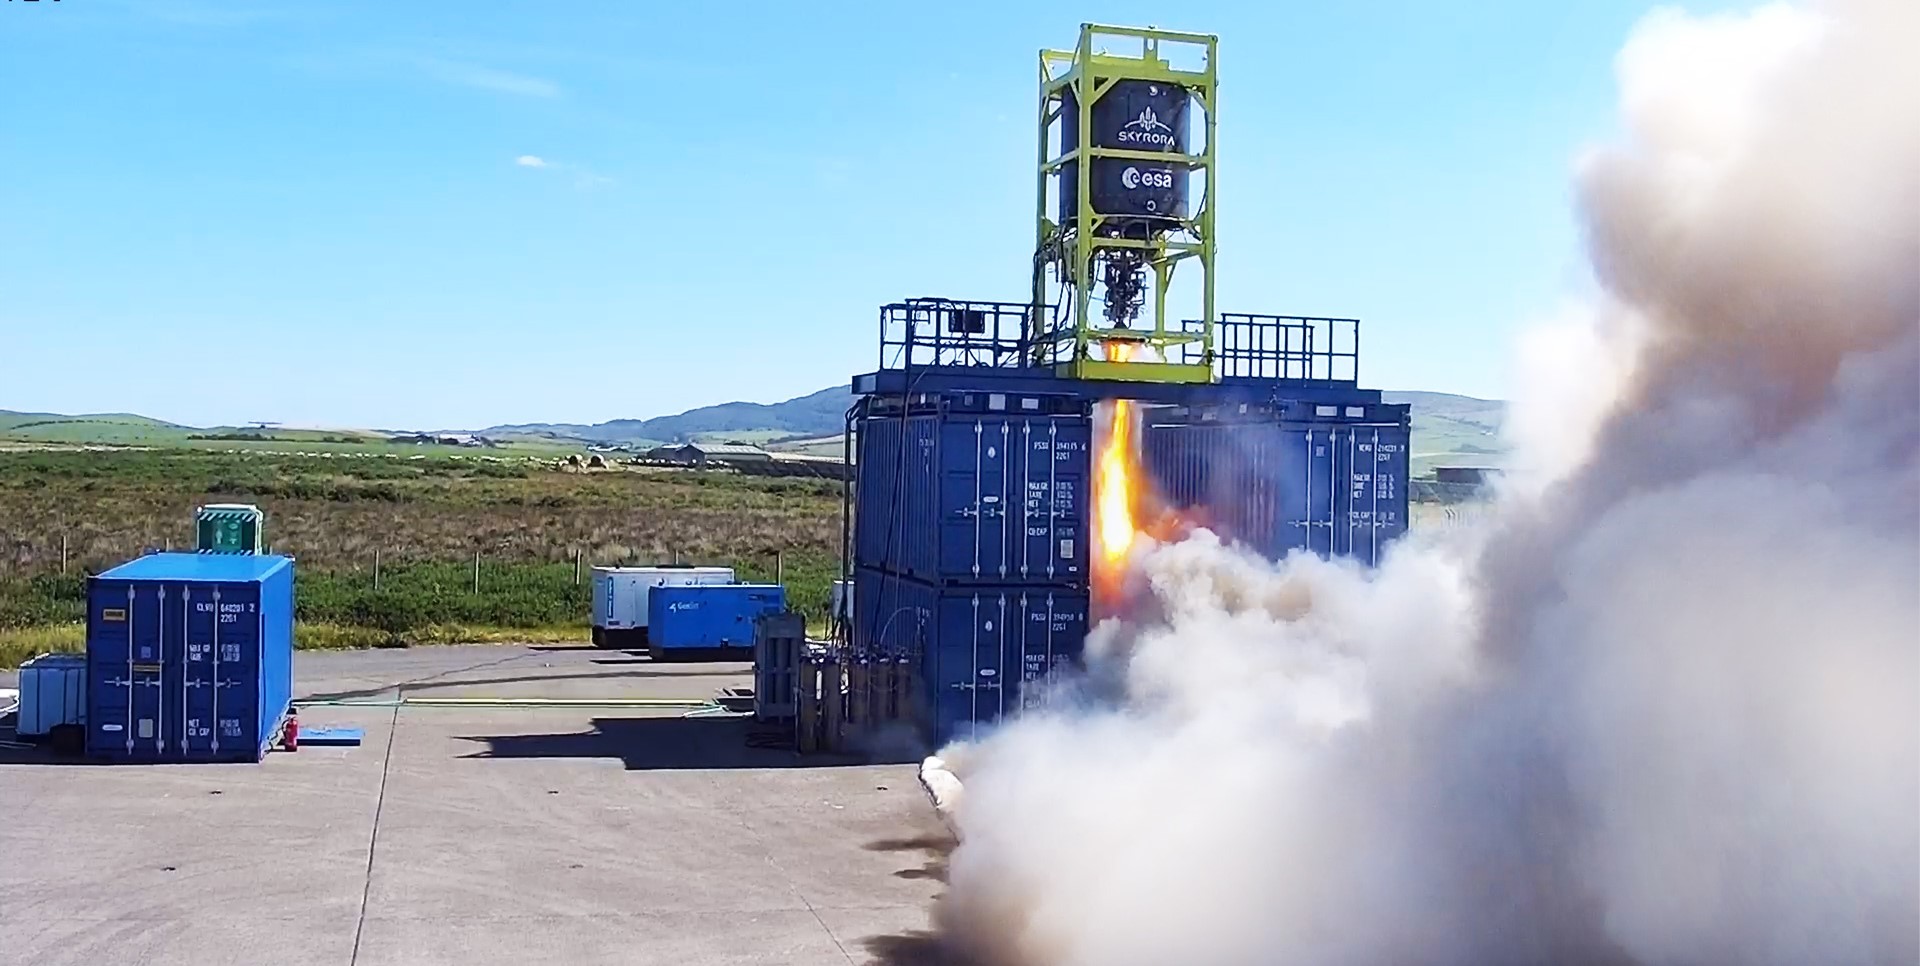 Skyrora 2nd Stage Static Fire Test a Roaring Success